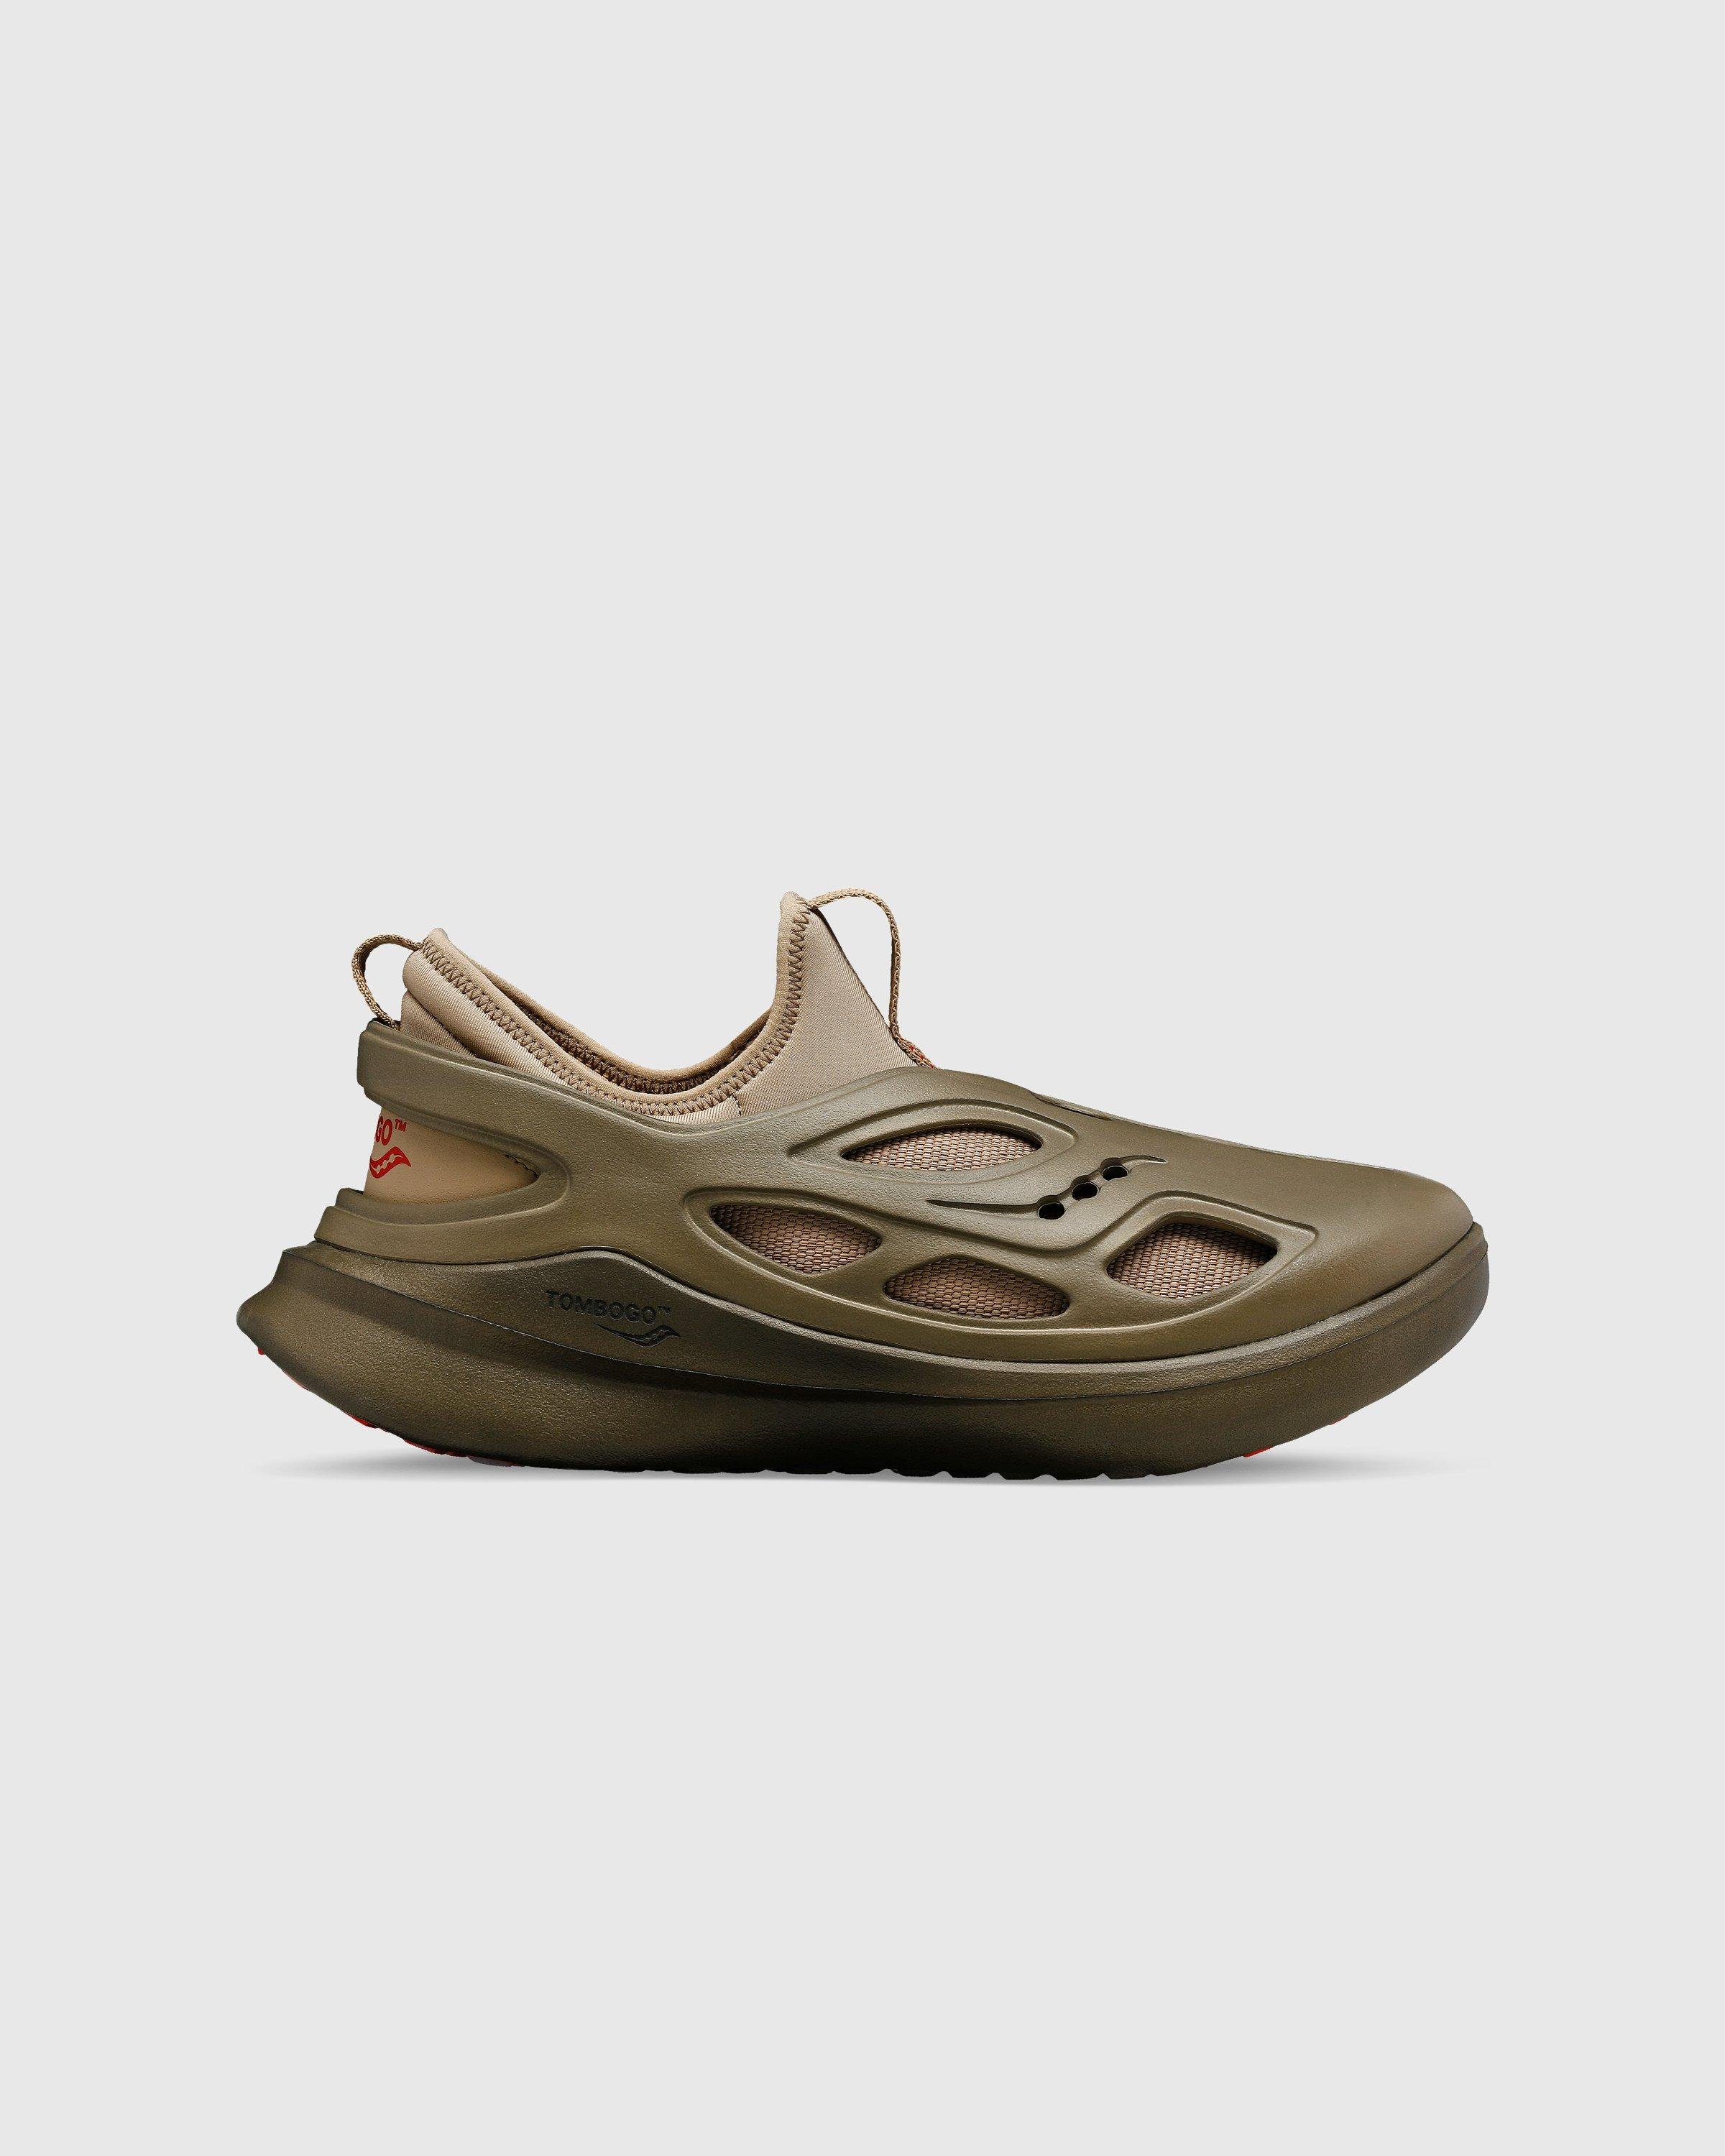 TOMBOGO x SauconyButterfly Boulder Brown by HIGHSNOBIETY